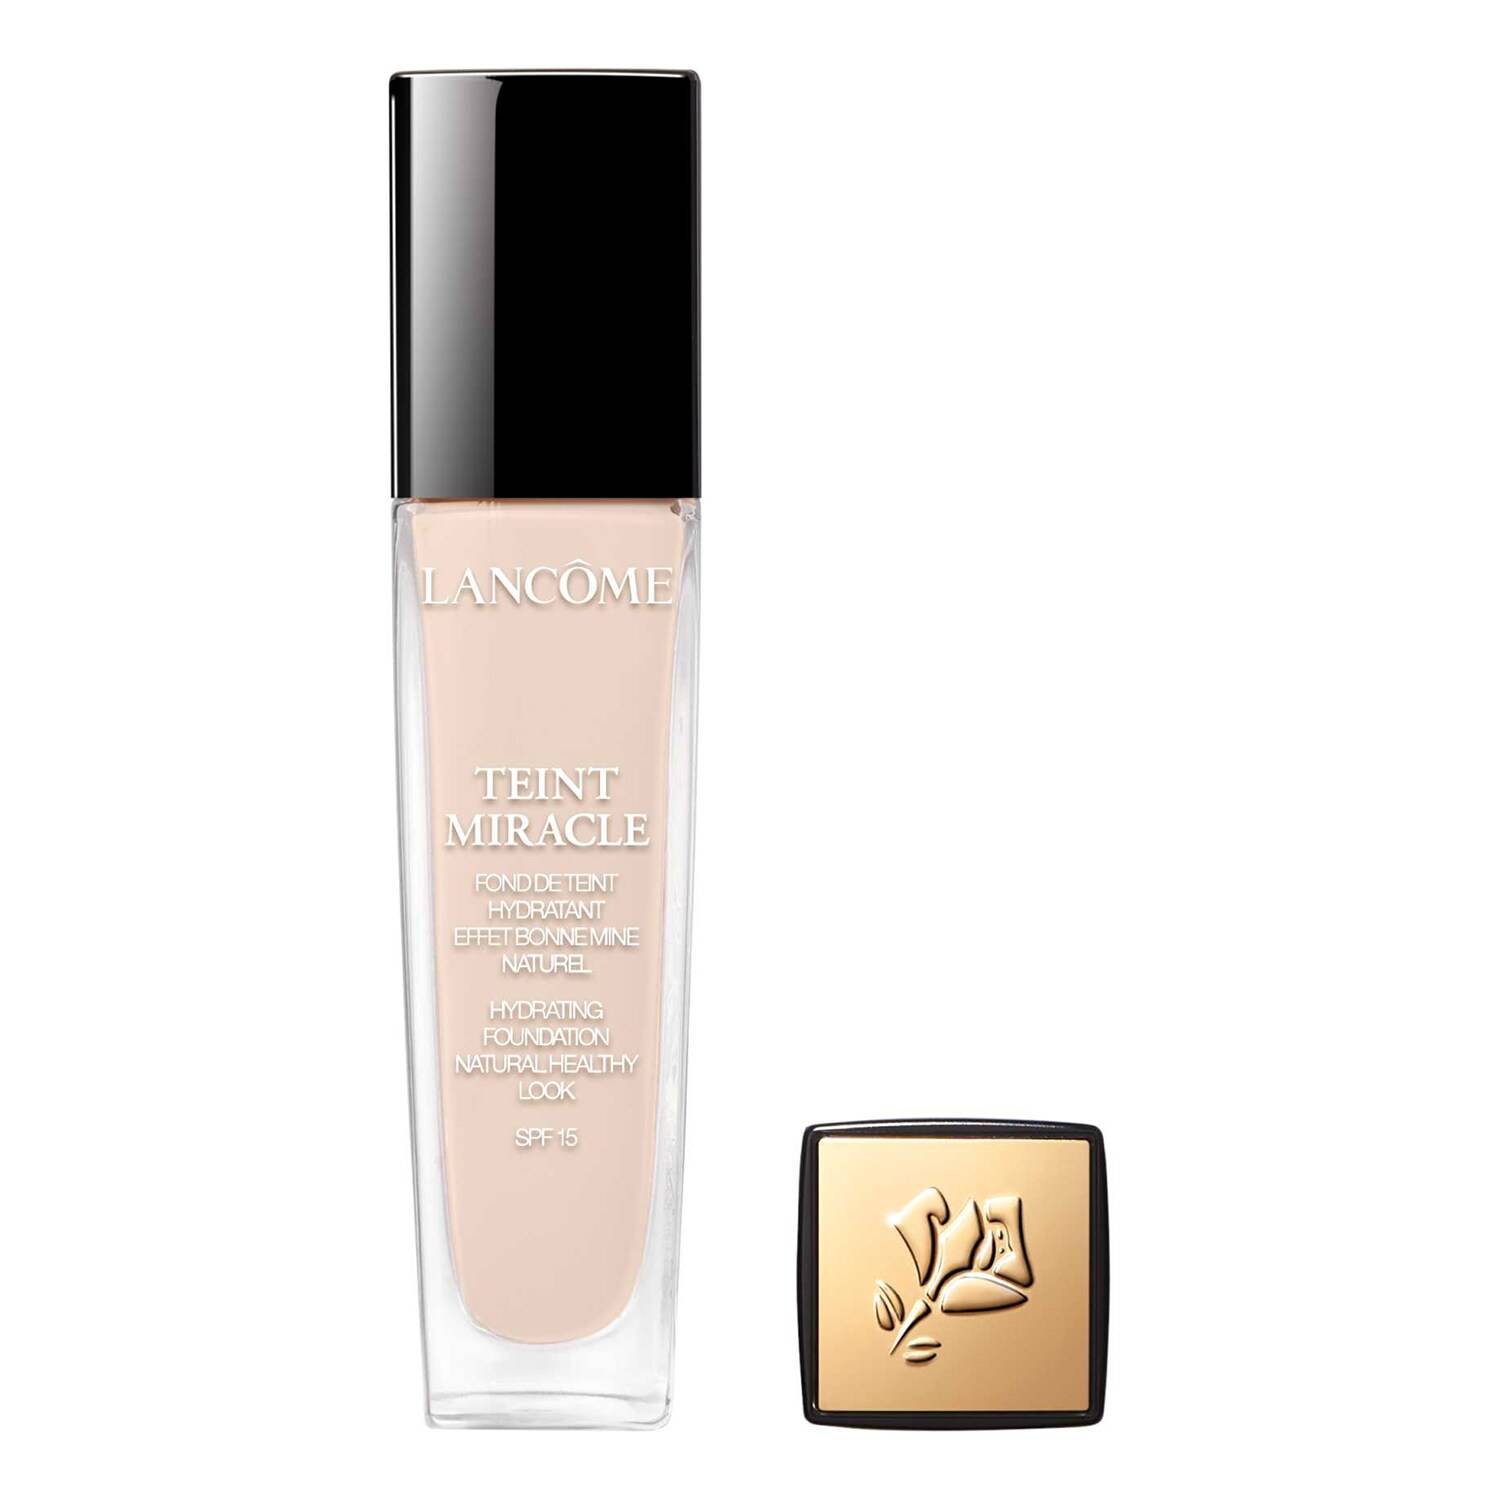 Lancome Teint Miracle Foundation 30Ml Teint Miracle 005 Beige Ivoire